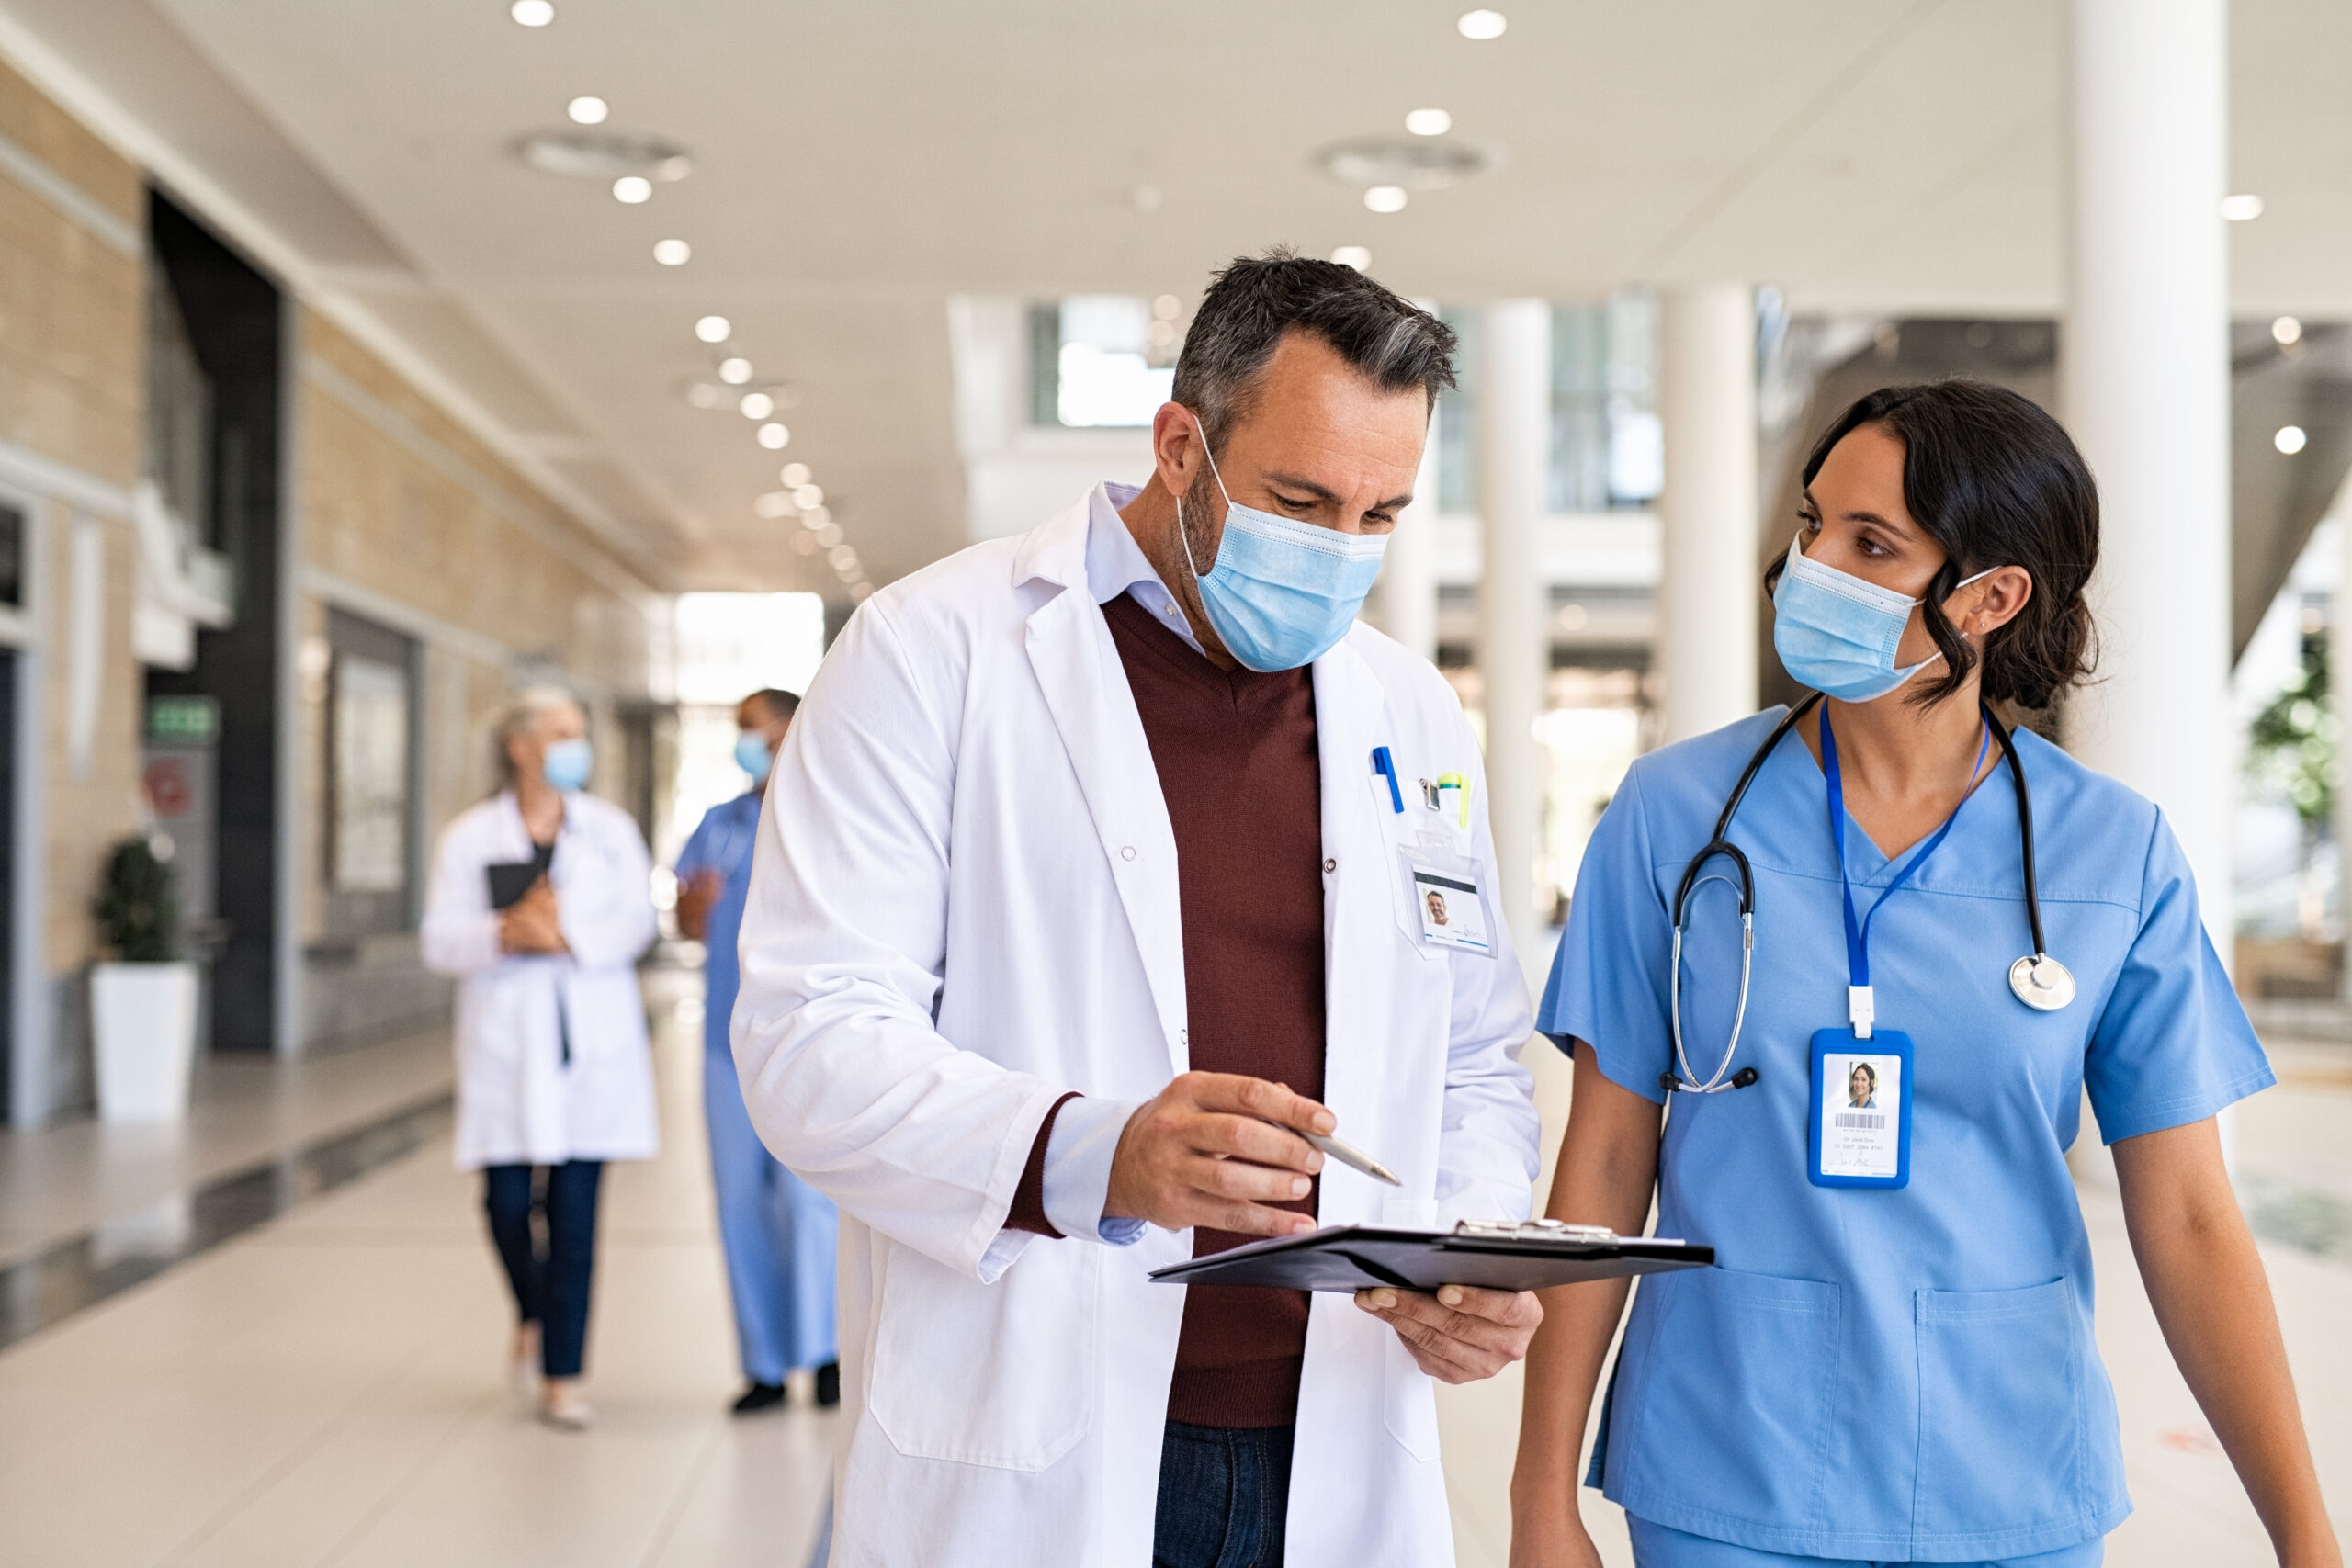 Two healthcare professionals walk alongside one another. One is wearing a white coat, and the other has on blue scrubs. 